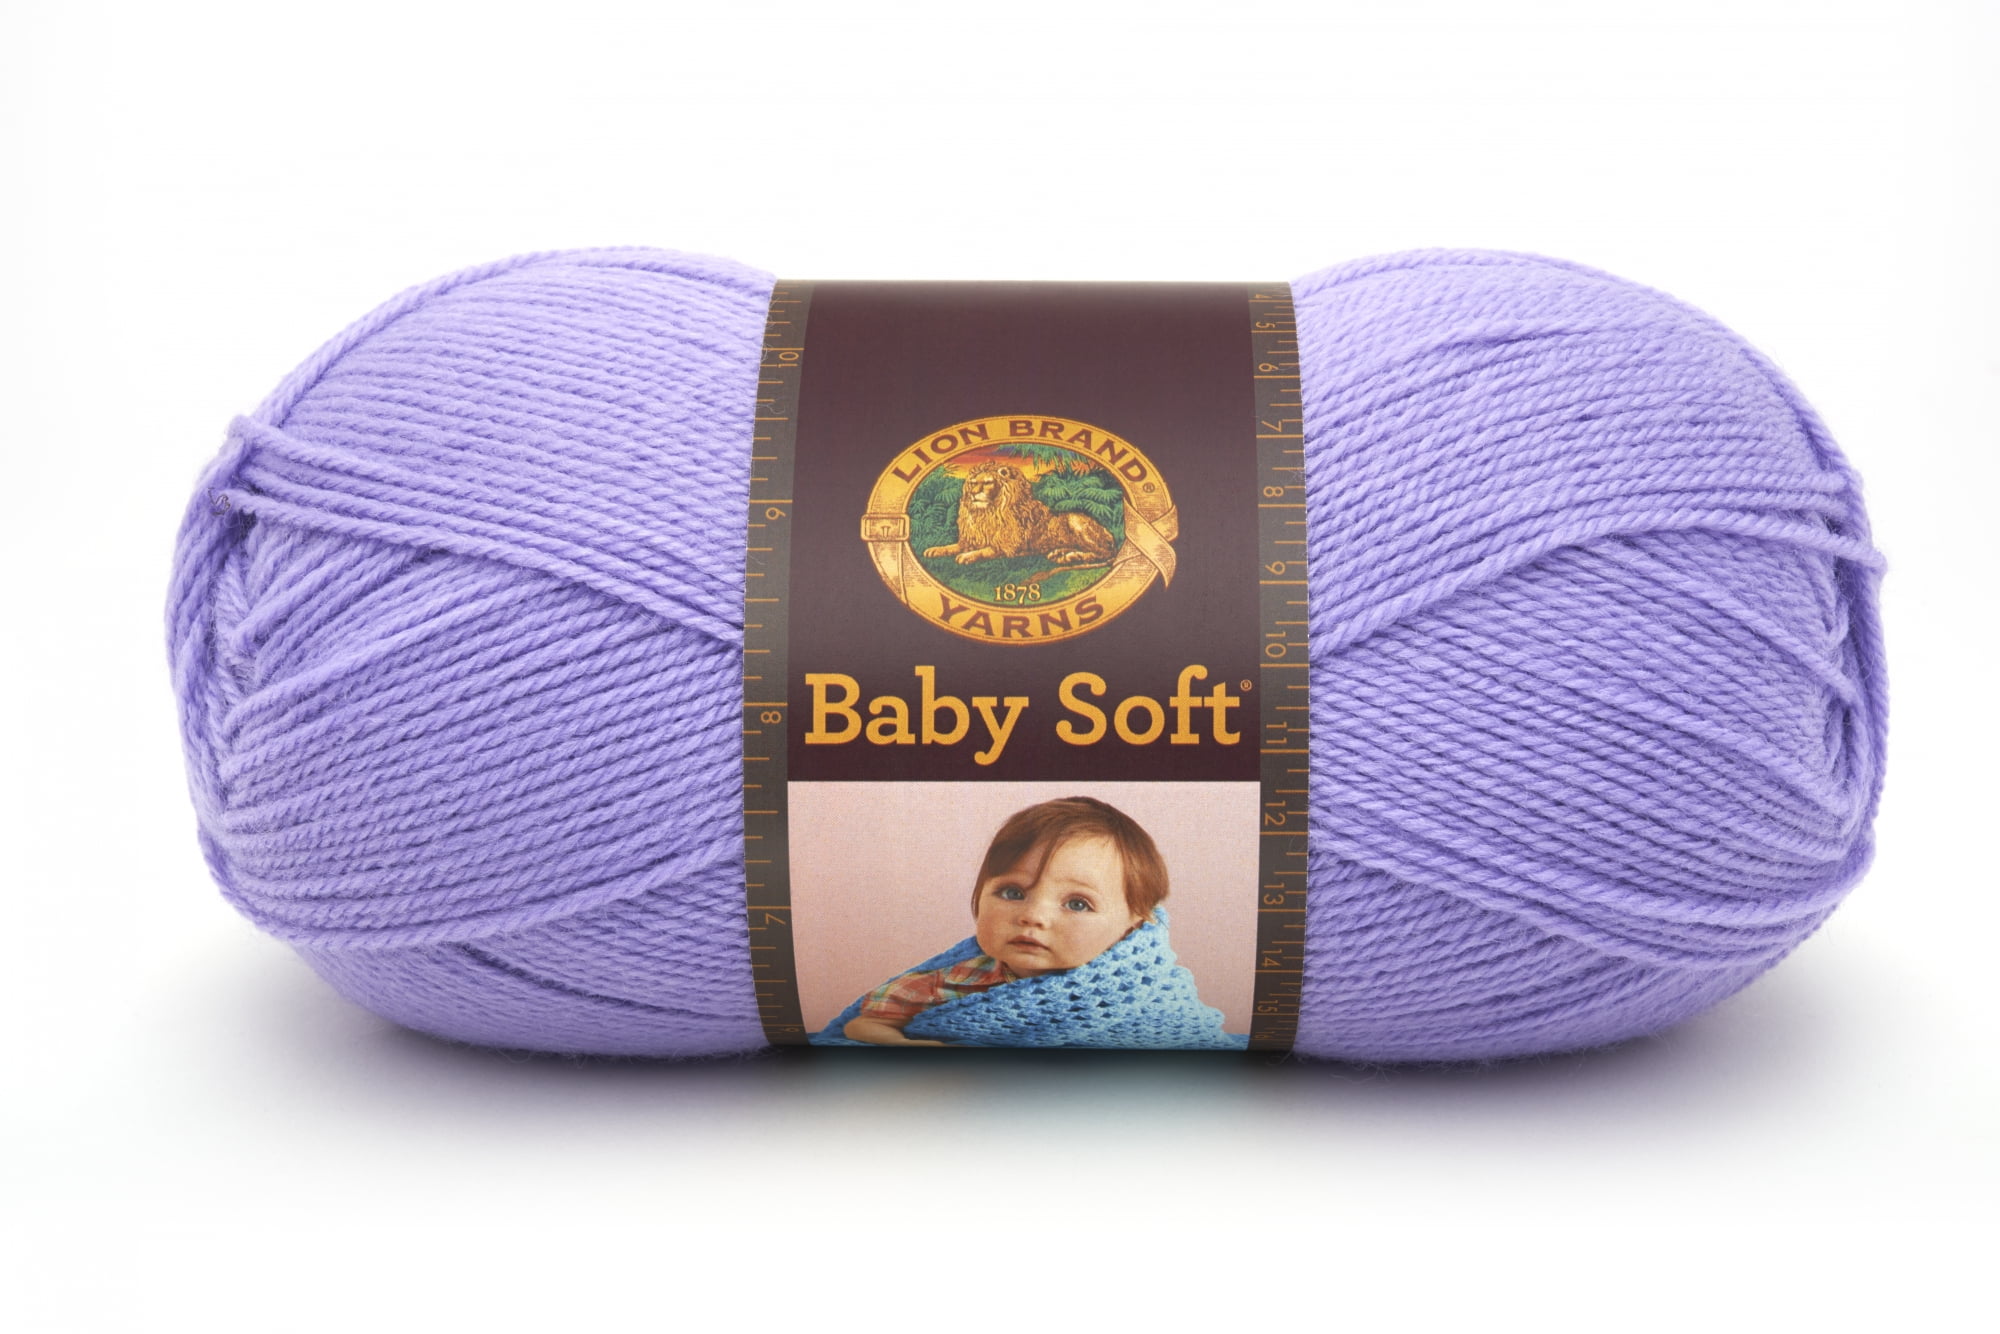 Changing a Go-To for a New Addition- Lion Brand Baby Soft